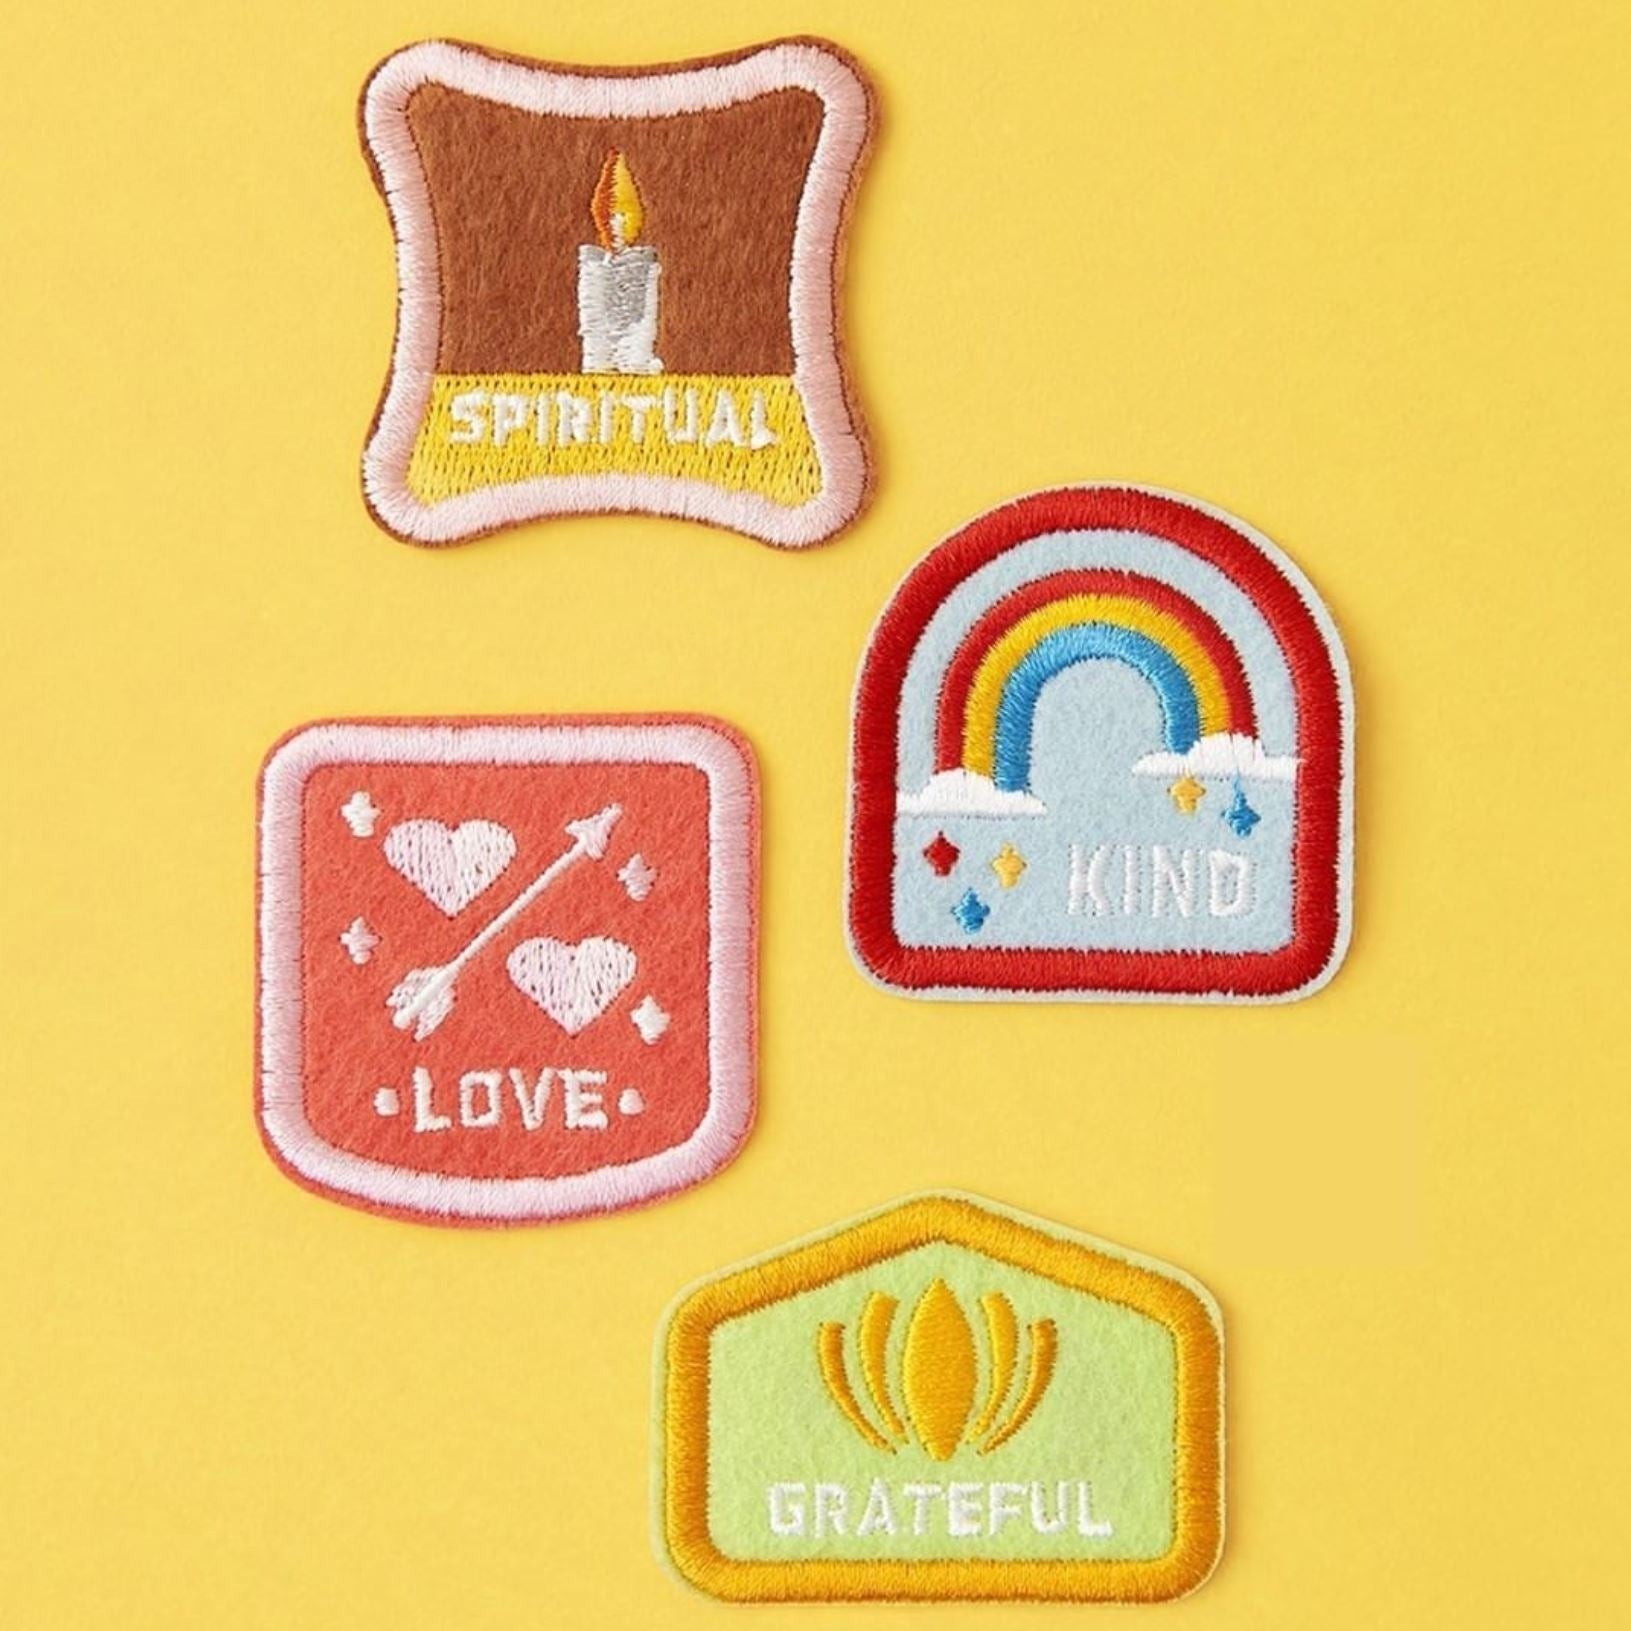 Set of 4 children's character badge patches featuring the traits Kind, Spiritual, Love, and Grateful, with adhesive and iron-on backing, shown on an aqua duffle bag, perfect for customizing backpacks and clothing, set against a yellow backdrop.